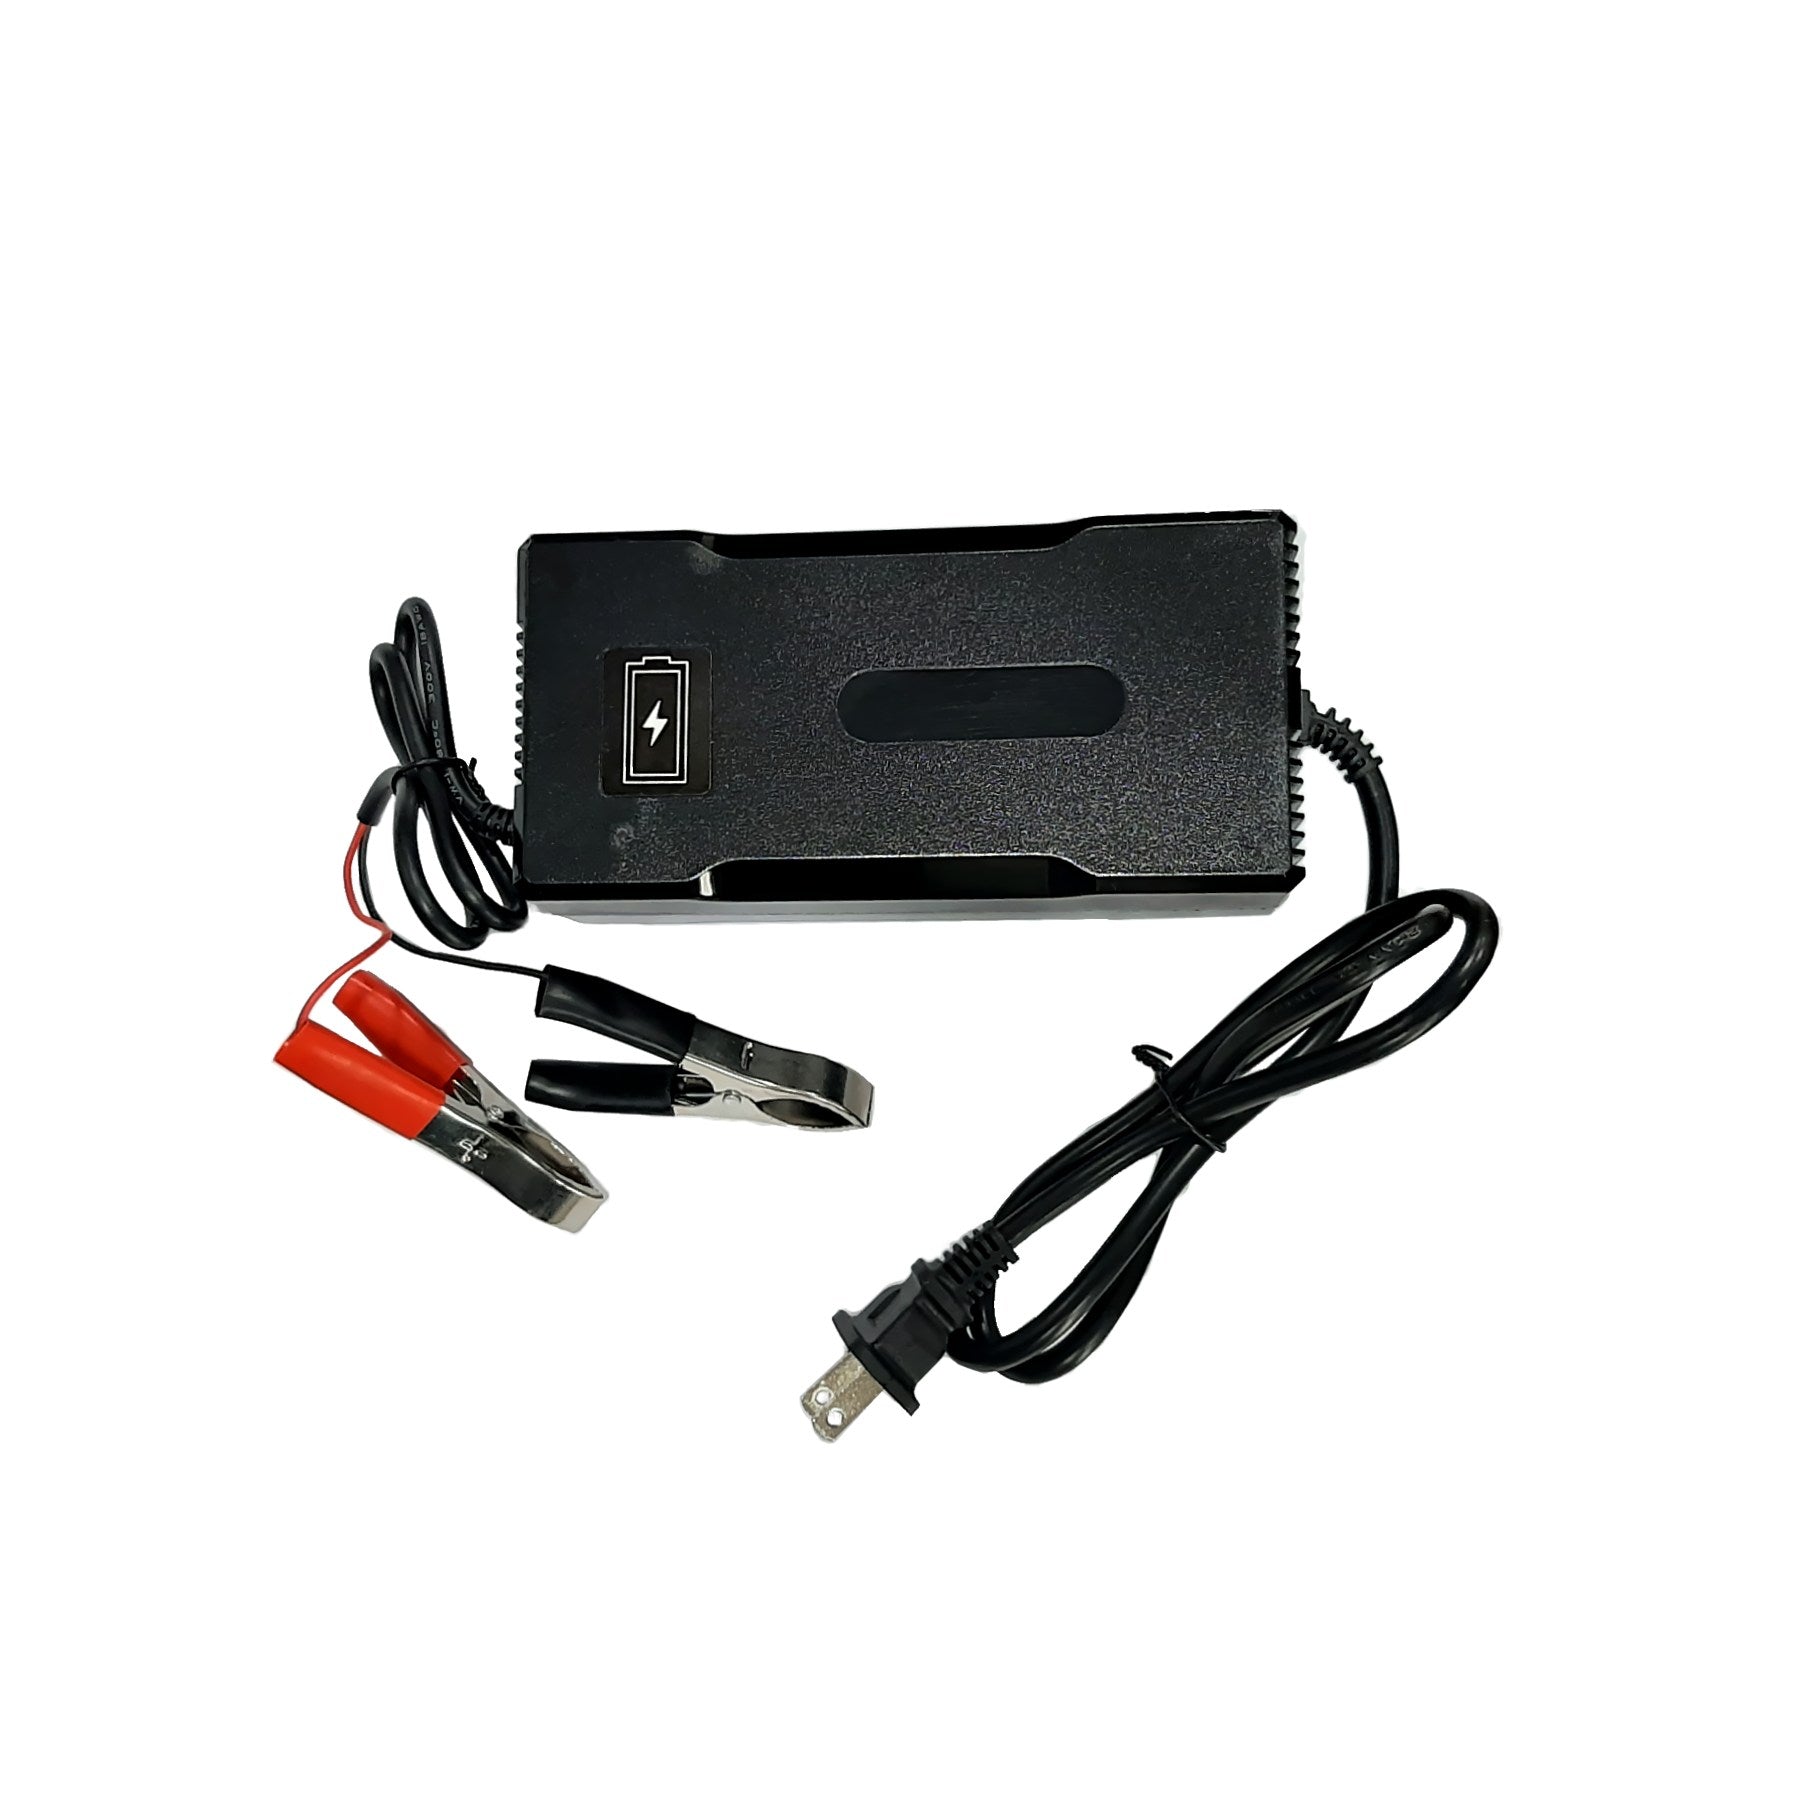 24V 5A Li-ion Battery Charger - Aegis Battery Lithium ion